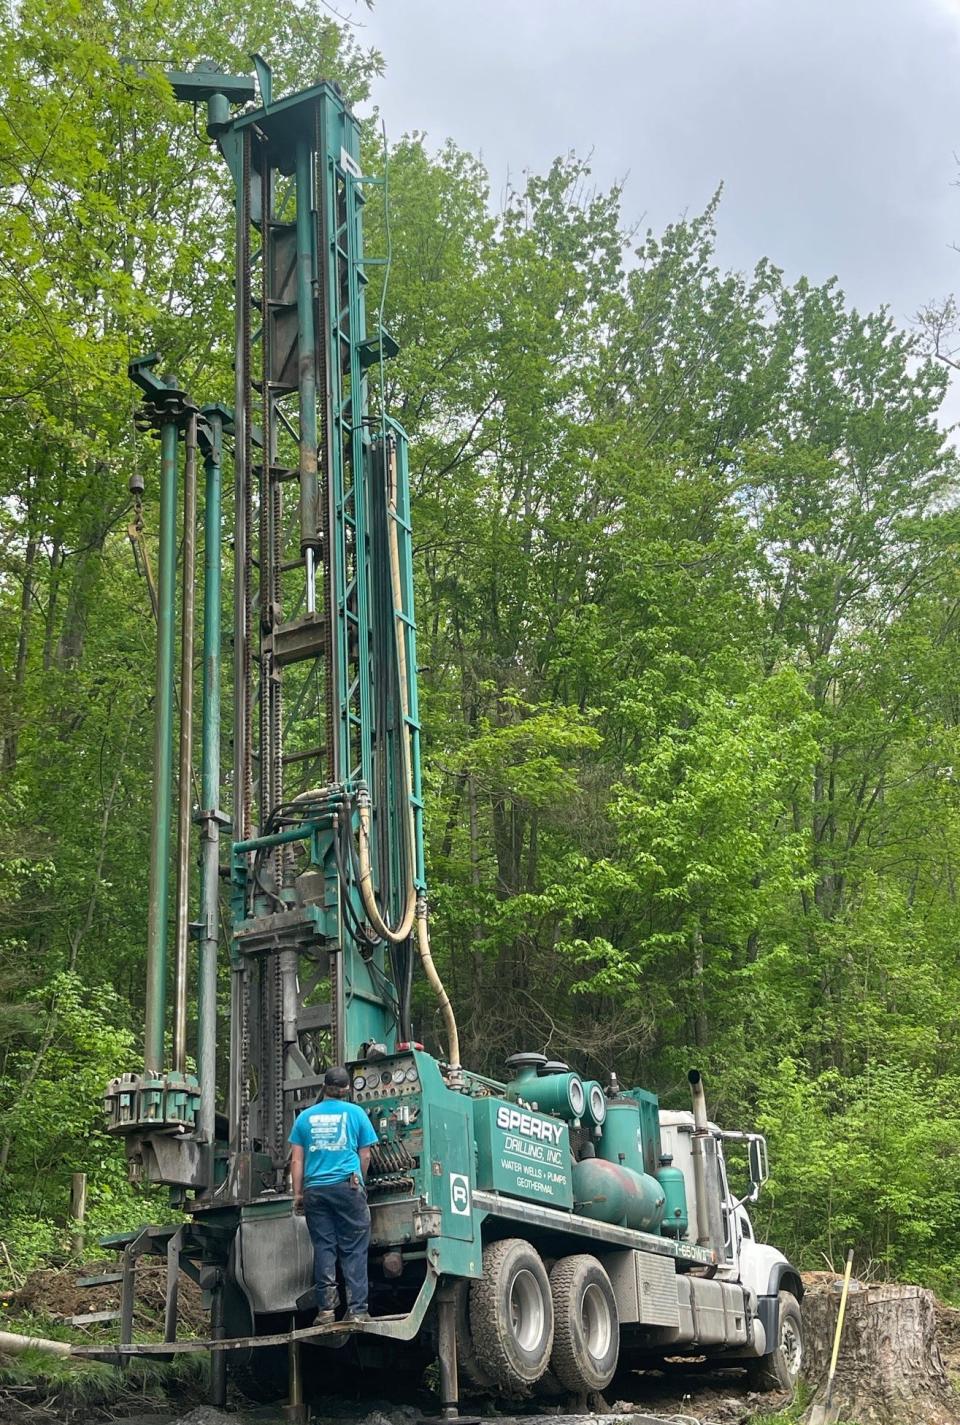 A crew from Sperry Drilling Inc., in Berlin, drilled the Godin's well to a new depth of 500 feet to restore the home's water supply.